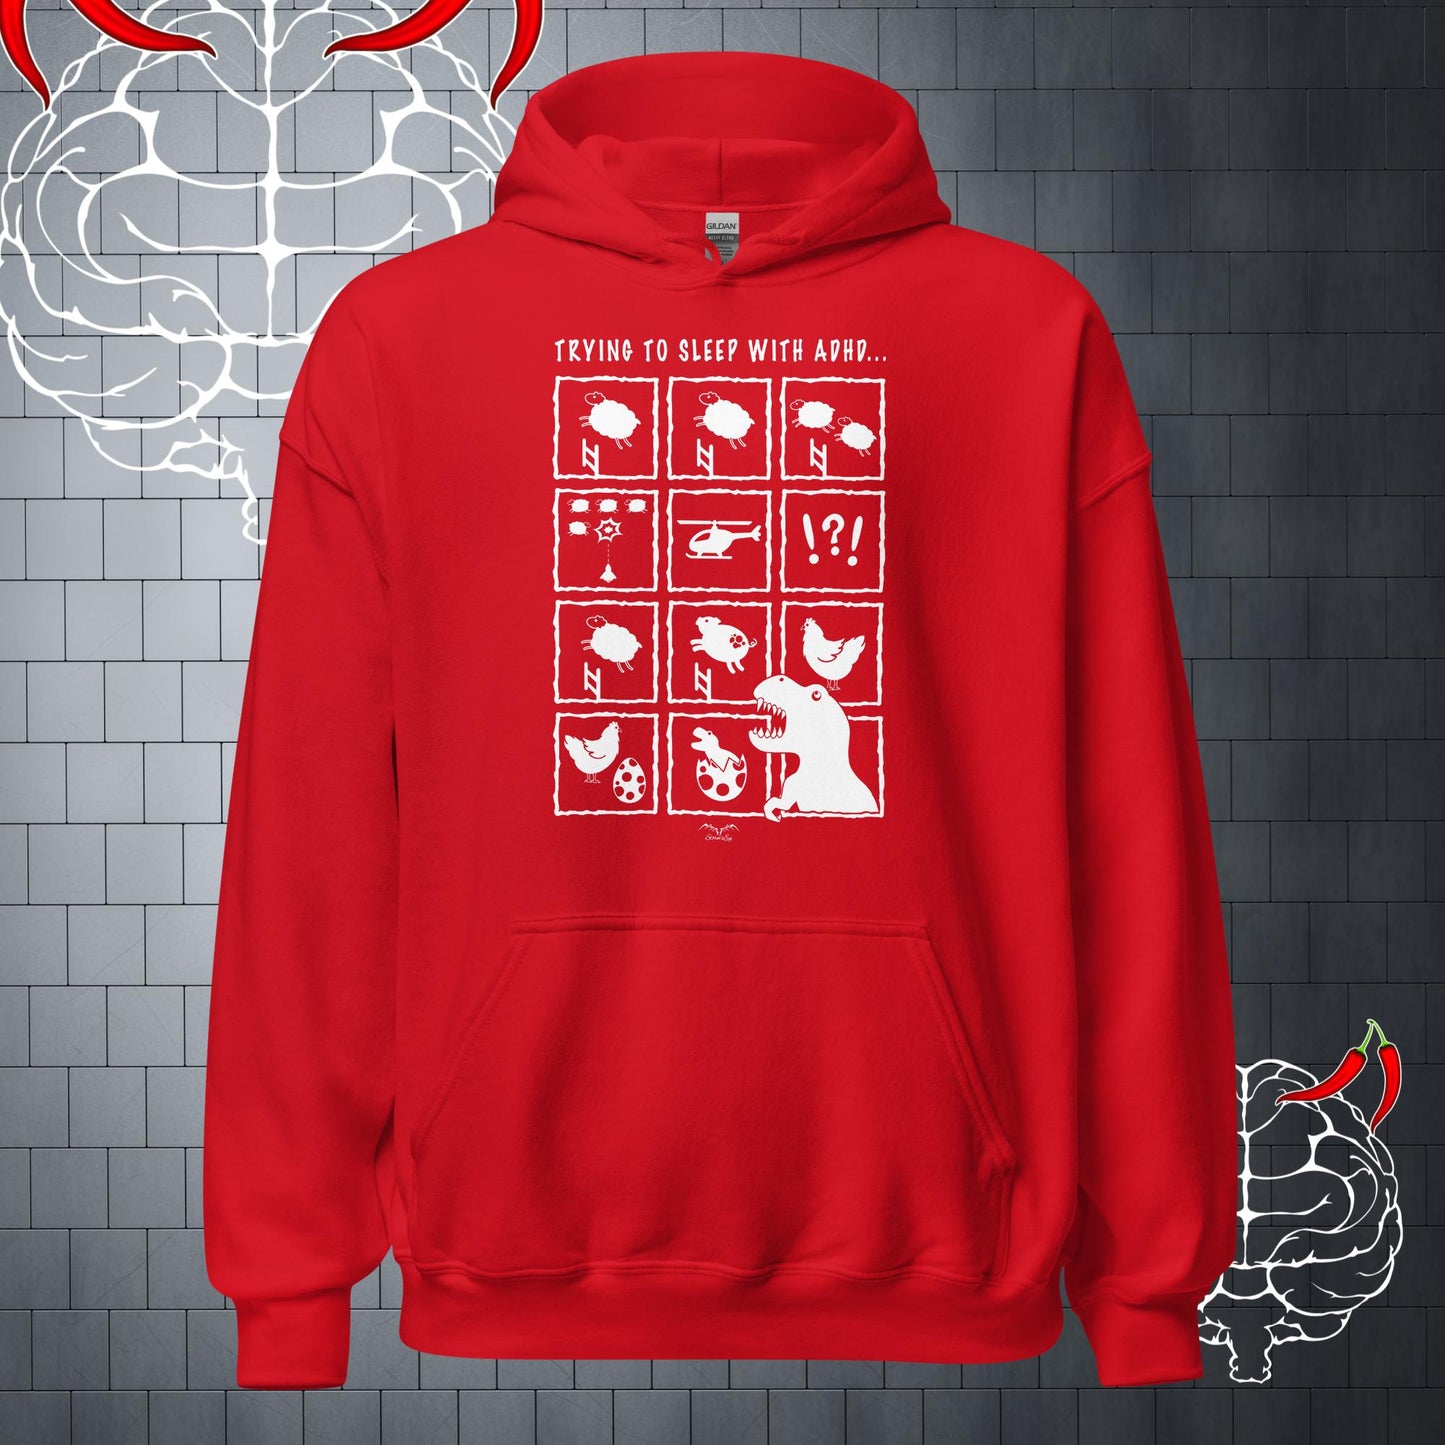 Funny ADHD insomnia Hoodie, bright red by Stormseye Design